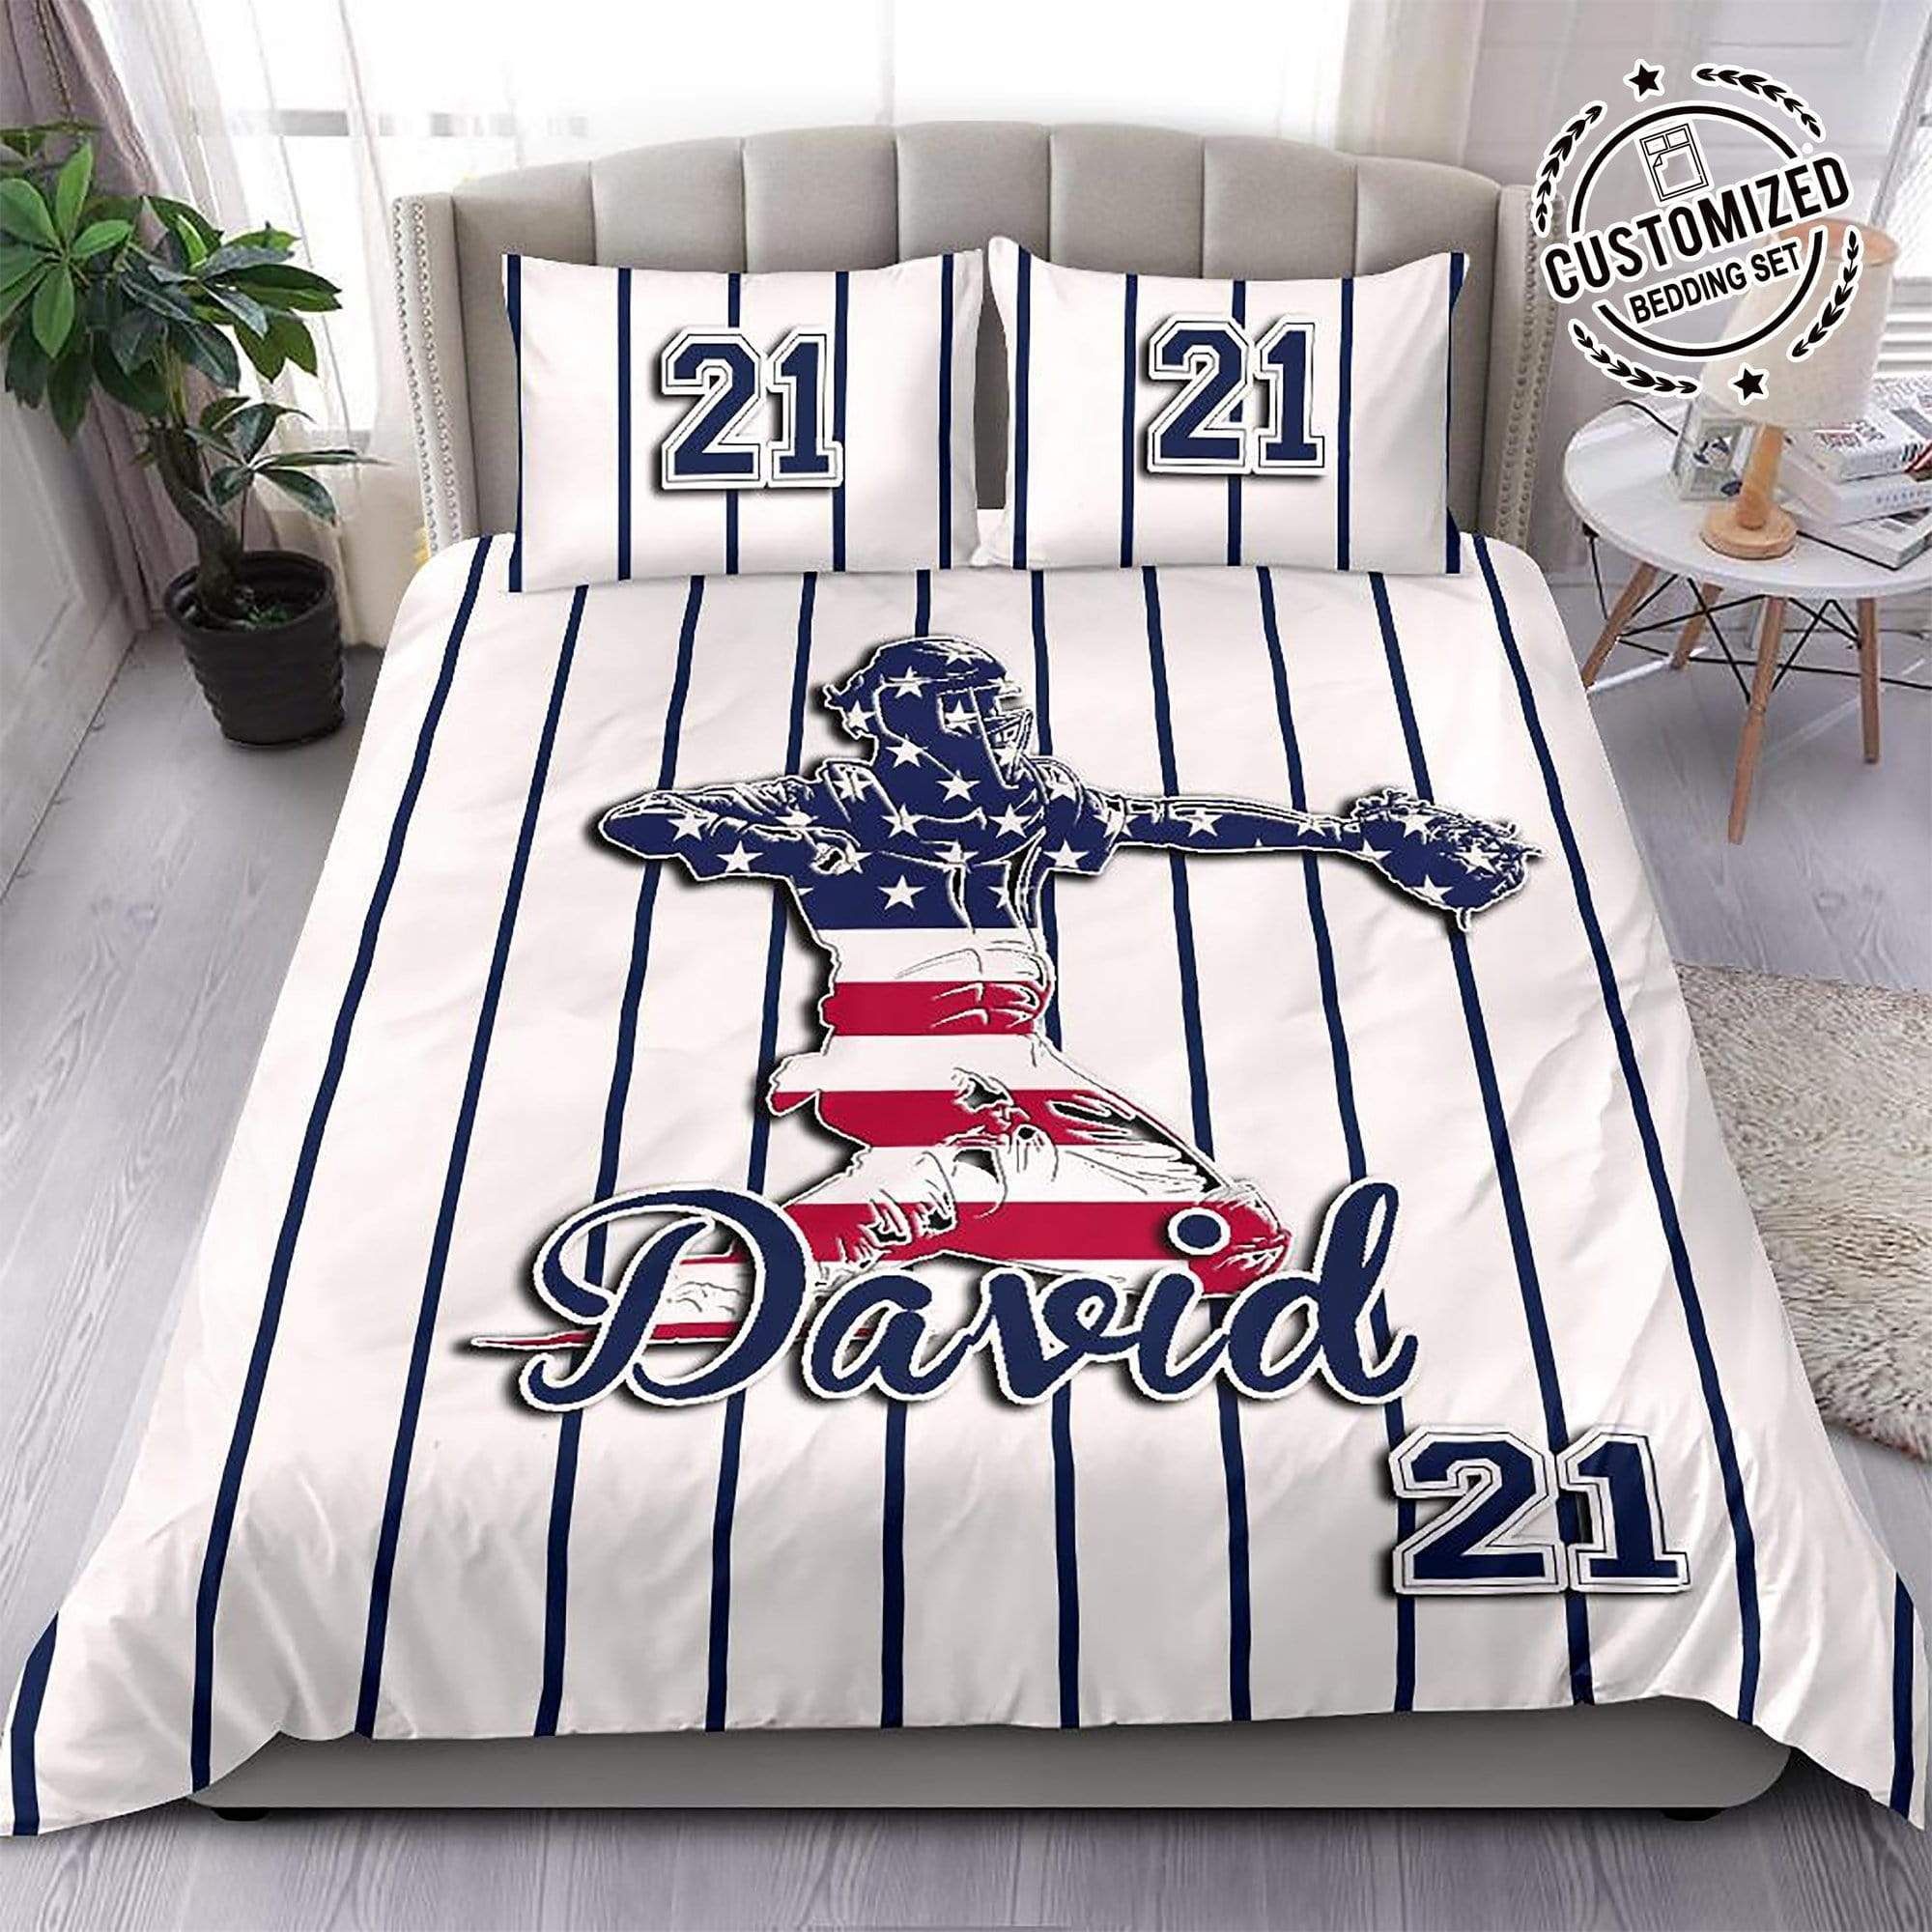 Personalized Baseball Catcher American Player Custom Duvet Cover Bedding Set With Your Name